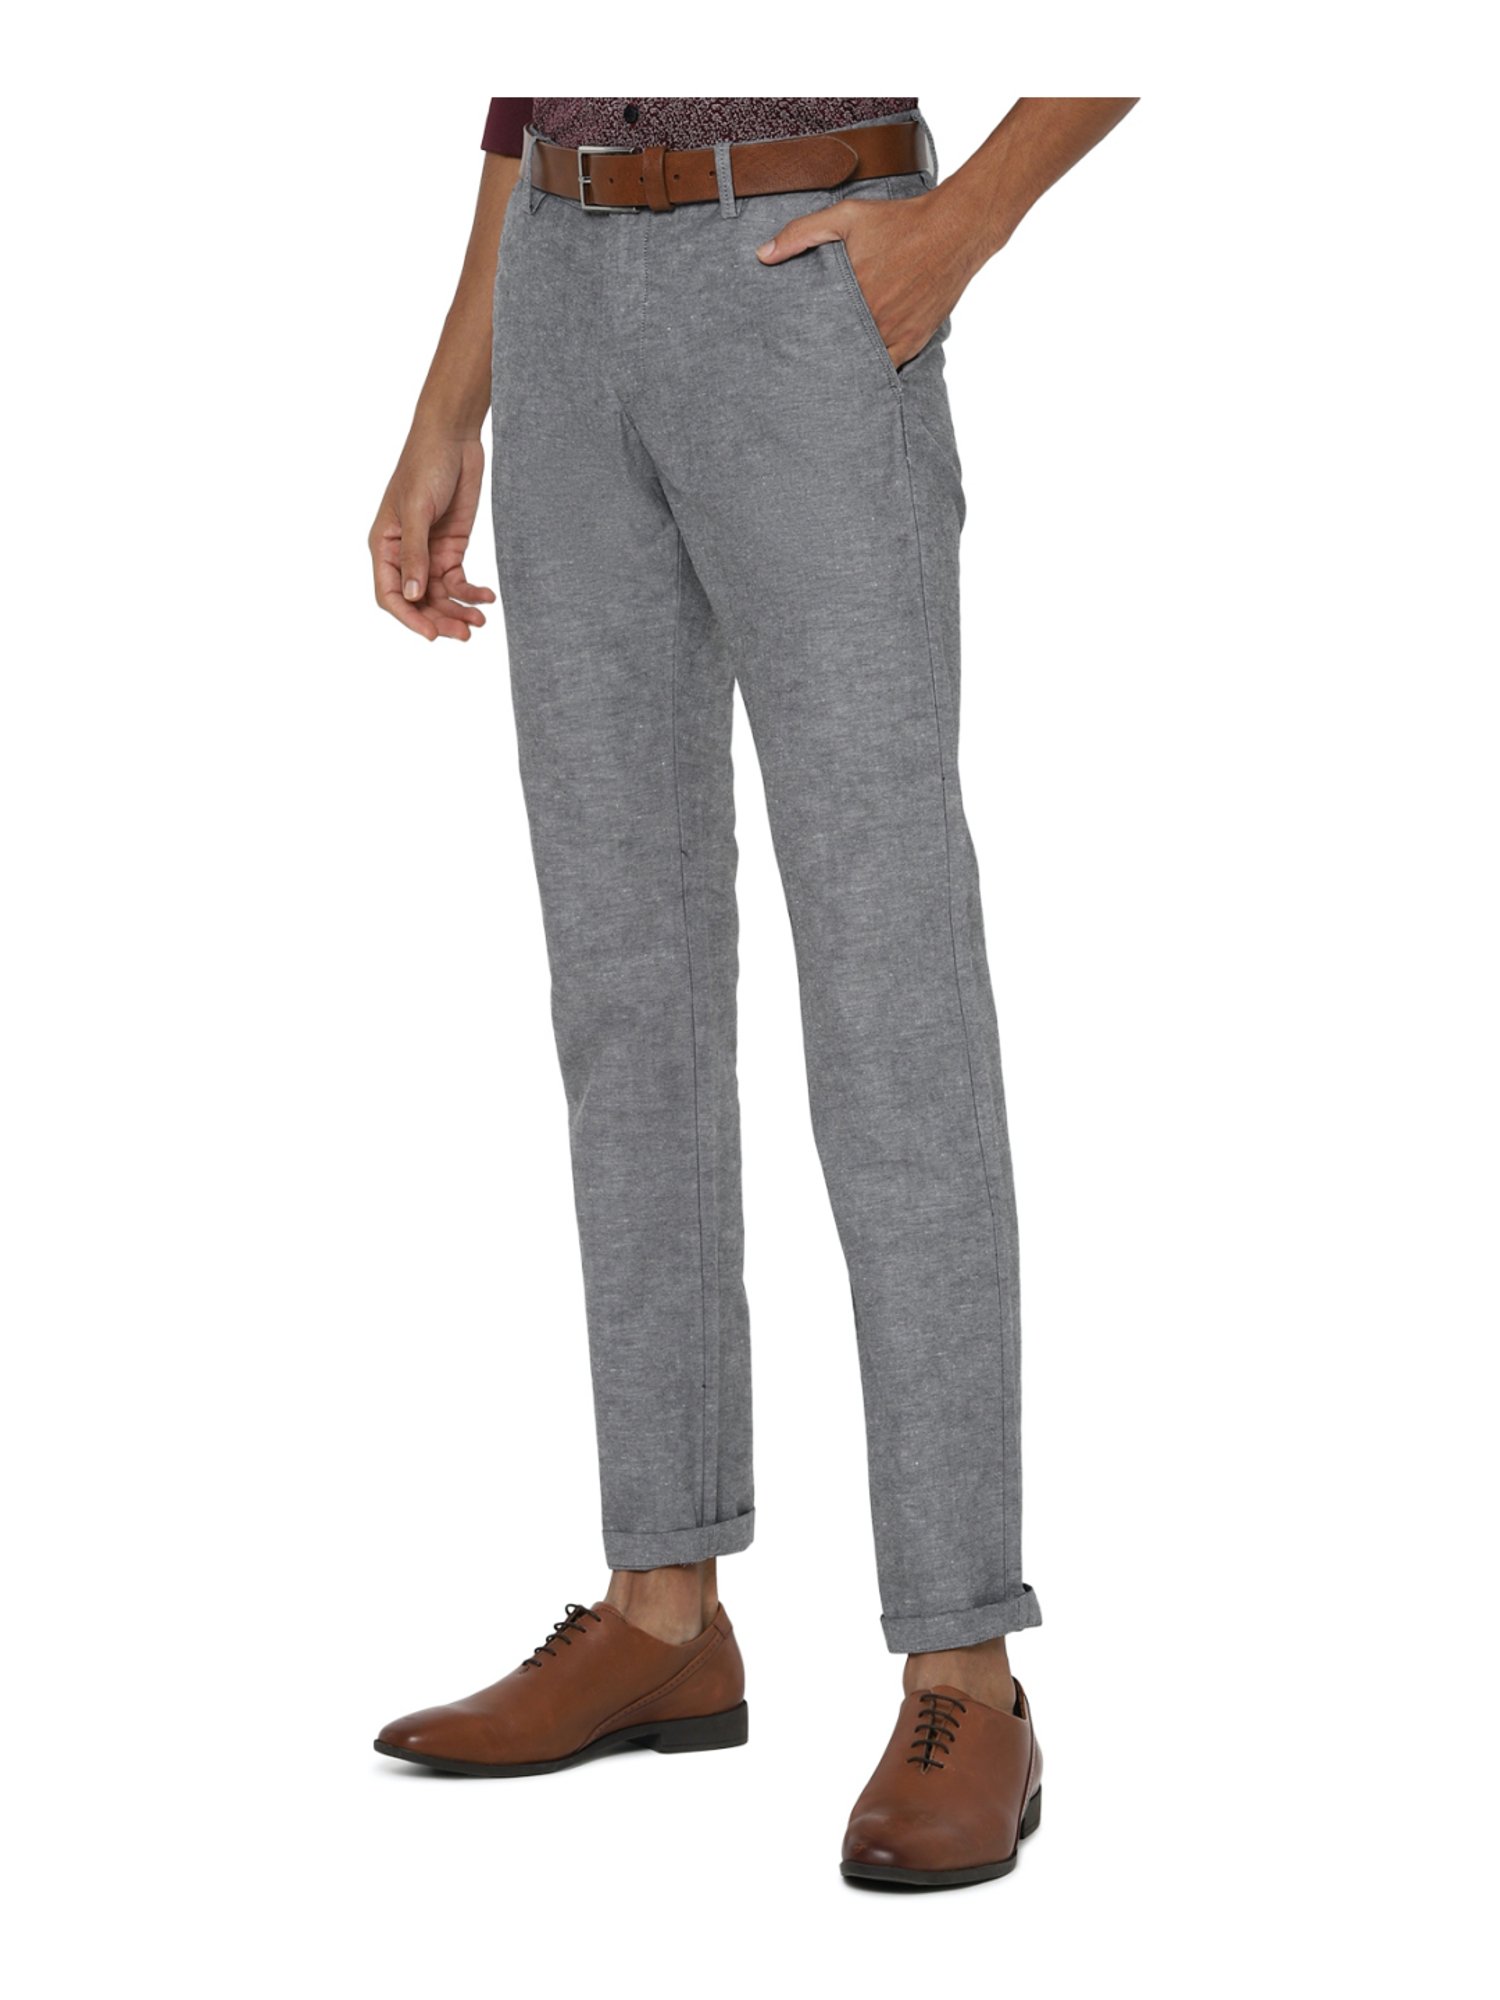 Buy ALLEN SOLLY Mens Regular Fit Printed Trousers  Shoppers Stop